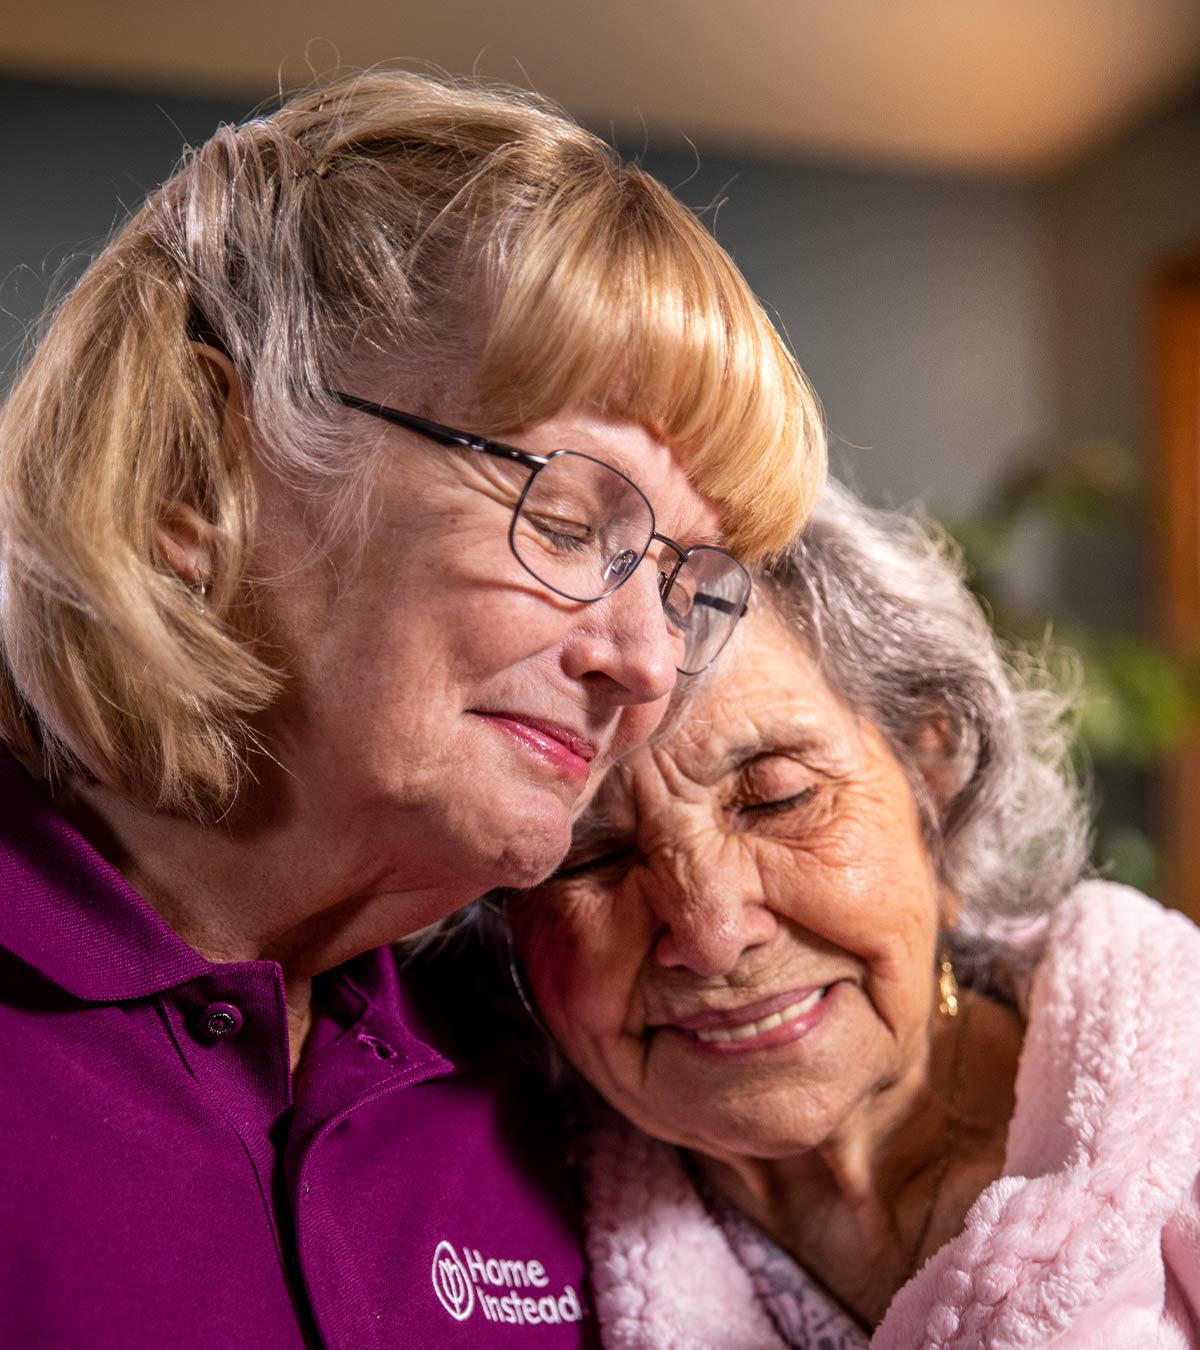 CAREGiver providing in-home senior care services. Home Instead of Santa Fe, NM provides Elder Care to aging adults. 